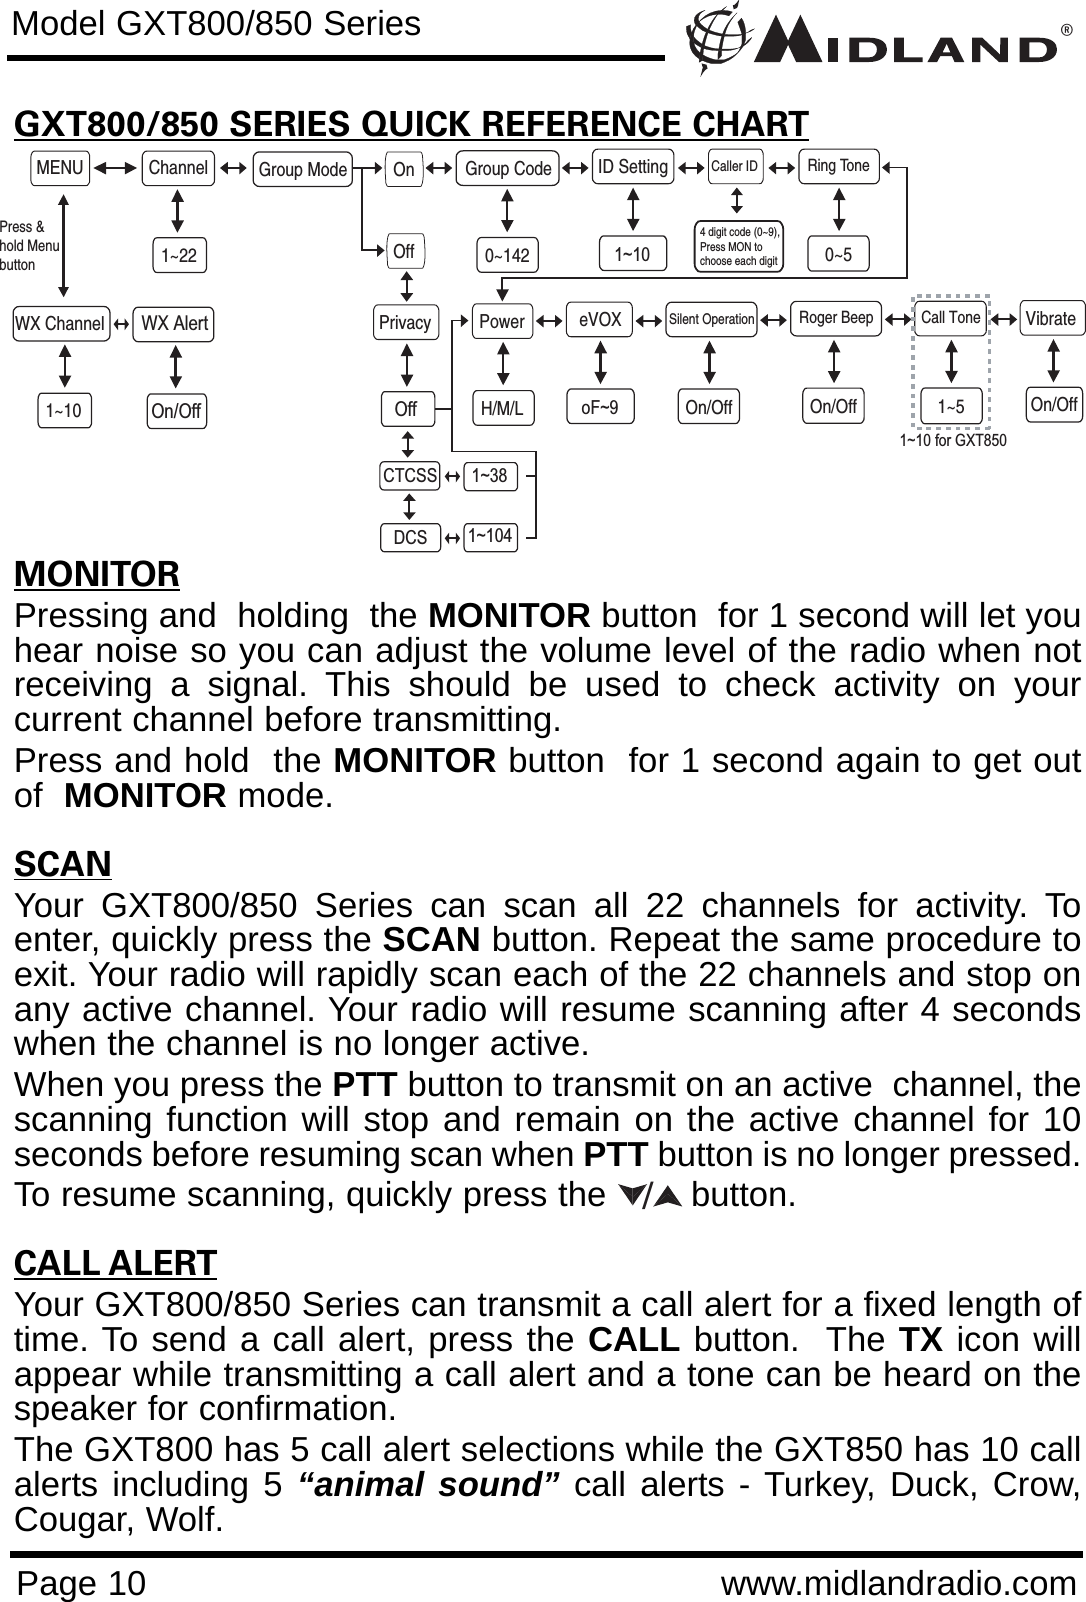 ®Page 10 www.midlandradio.comGXT800/850 SERIES QUICK REFERENCE CHARTMONITORPressing and  holding  the MONITOR button  for 1 second will let youhear noise so you can adjust the volume level of the radio when notreceiving a signal. This should be used to check activity on yourcurrent channel before transmitting. Press and hold  the MONITOR button  for 1 second again to get outof  MONITOR mode.SCANYour GXT800/850 Series can scan all 22 channels for activity. Toenter, quickly press the SCAN button. Repeat the same procedure toexit. Your radio will rapidly scan each of the 22 channels and stop onany active channel. Your radio will resume scanning after 4 secondswhen the channel is no longer active.When you press the PTT button to transmit on an active  channel, thescanning function will stop and remain on the active channel for 10seconds before resuming scan when PTT button is no longer pressed. To resume scanning, quickly press the  button.CALL ALERTYour GXT800/850 Series can transmit a call alert for a fixed length oftime. To send a call alert, press the CALL button.  The TX icon willappear while transmitting a call alert and a tone can be heard on thespeaker for confirmation. The GXT800 has 5 call alert selections while the GXT850 has 10 callalerts including 5 “animal sound” call alerts - Turkey, Duck, Crow,Cougar, Wolf.Model GXT800/850 SeriesMENU ChanneleVOX1~22Privacy Roger BeepOn/OffPowerH/M/LCall Tone1~5VibrateOn/OffWX Channel1~10Press &amp;hold MenubuttonSilent OperationOn/OffoF~9OffCTCSSDCS1~381~104WX AlertOn/OffGroup Mode OnOffID SettingRing Tone0~5Group Code0~142Caller ID4 digit code (0~9), Press MON to choose each digit1~101~10 for GXT850/